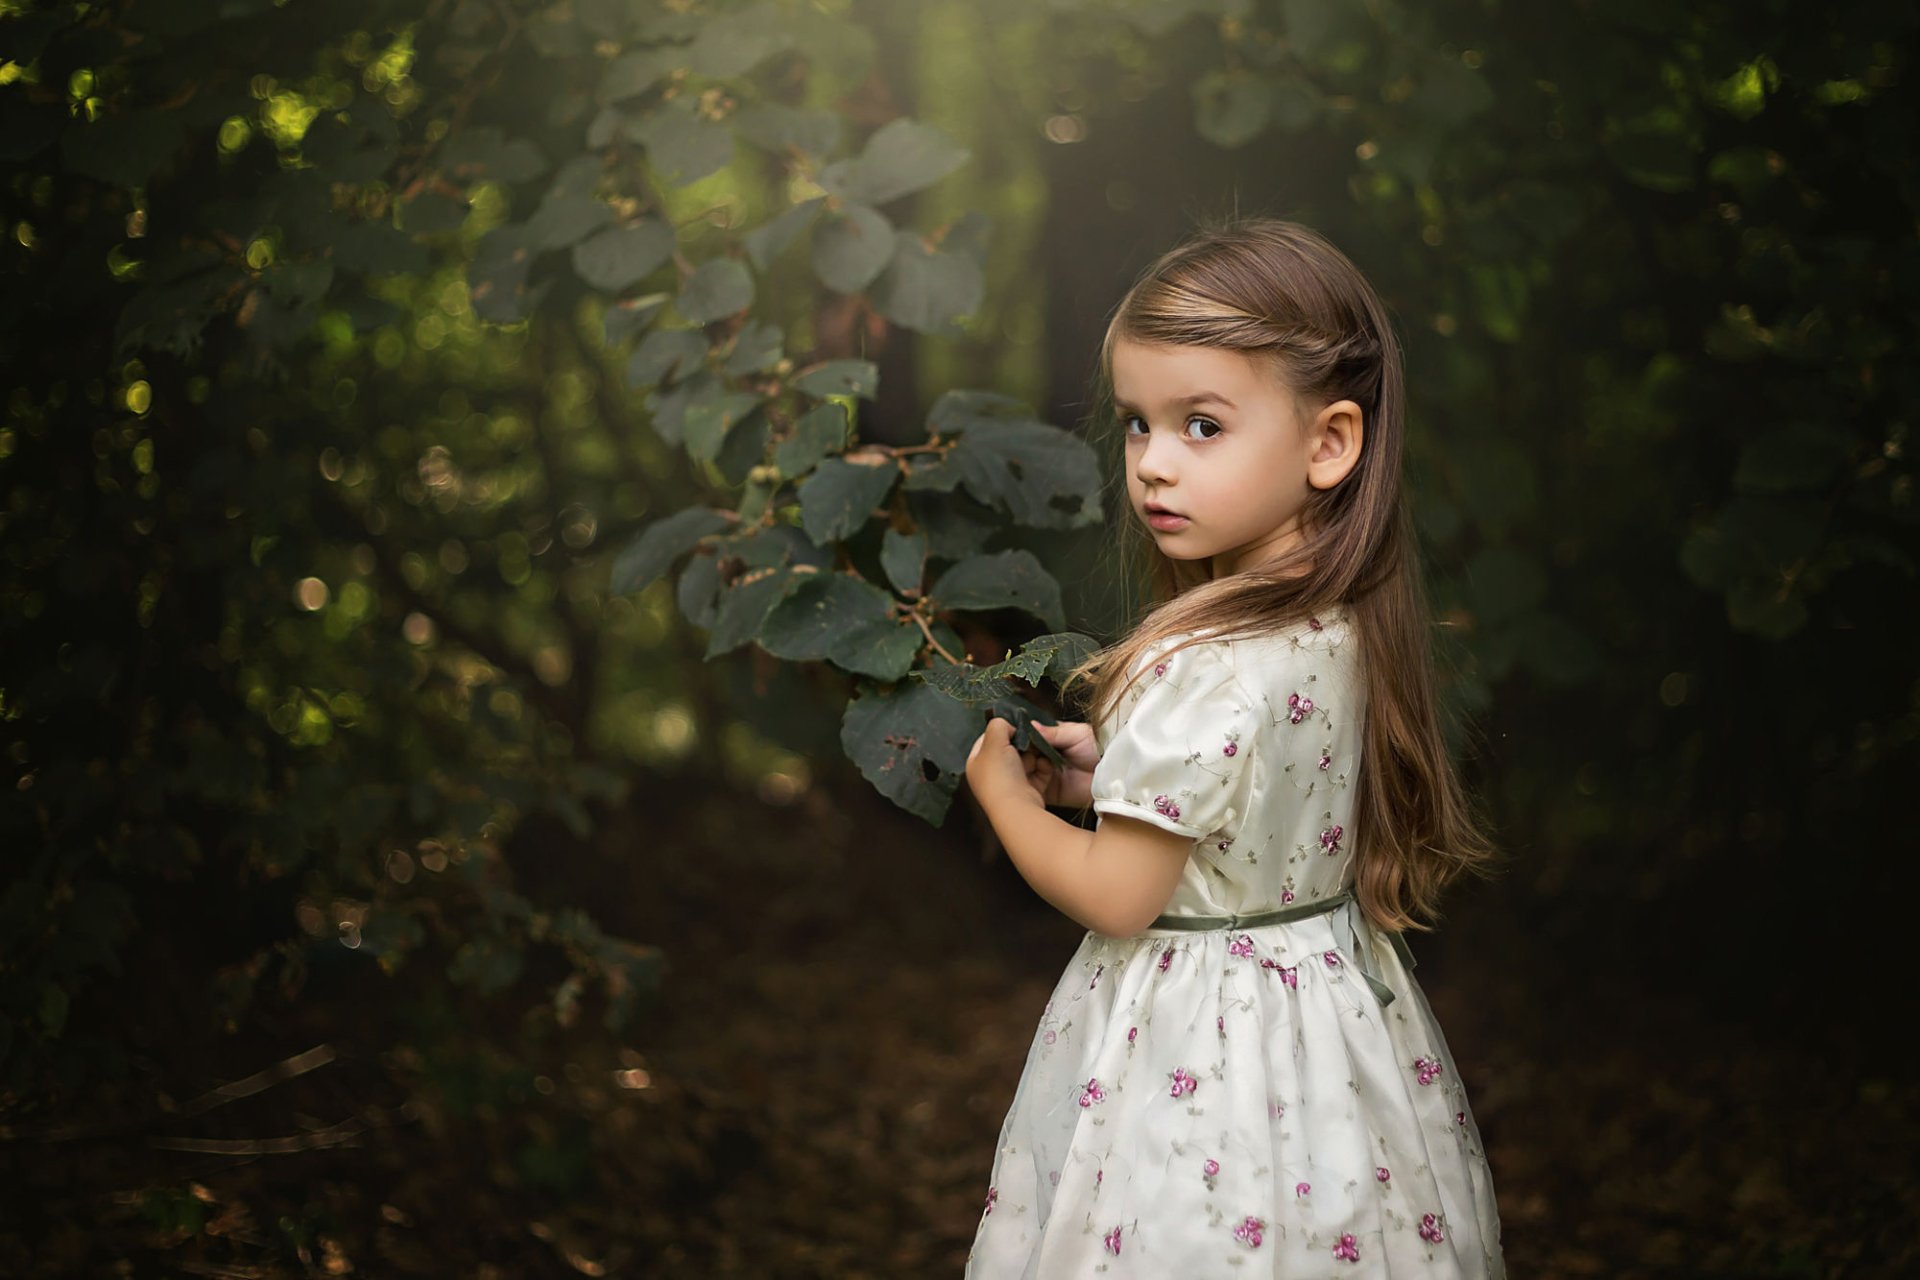 little girl wallpaper,people in nature,nature,photograph,green,child